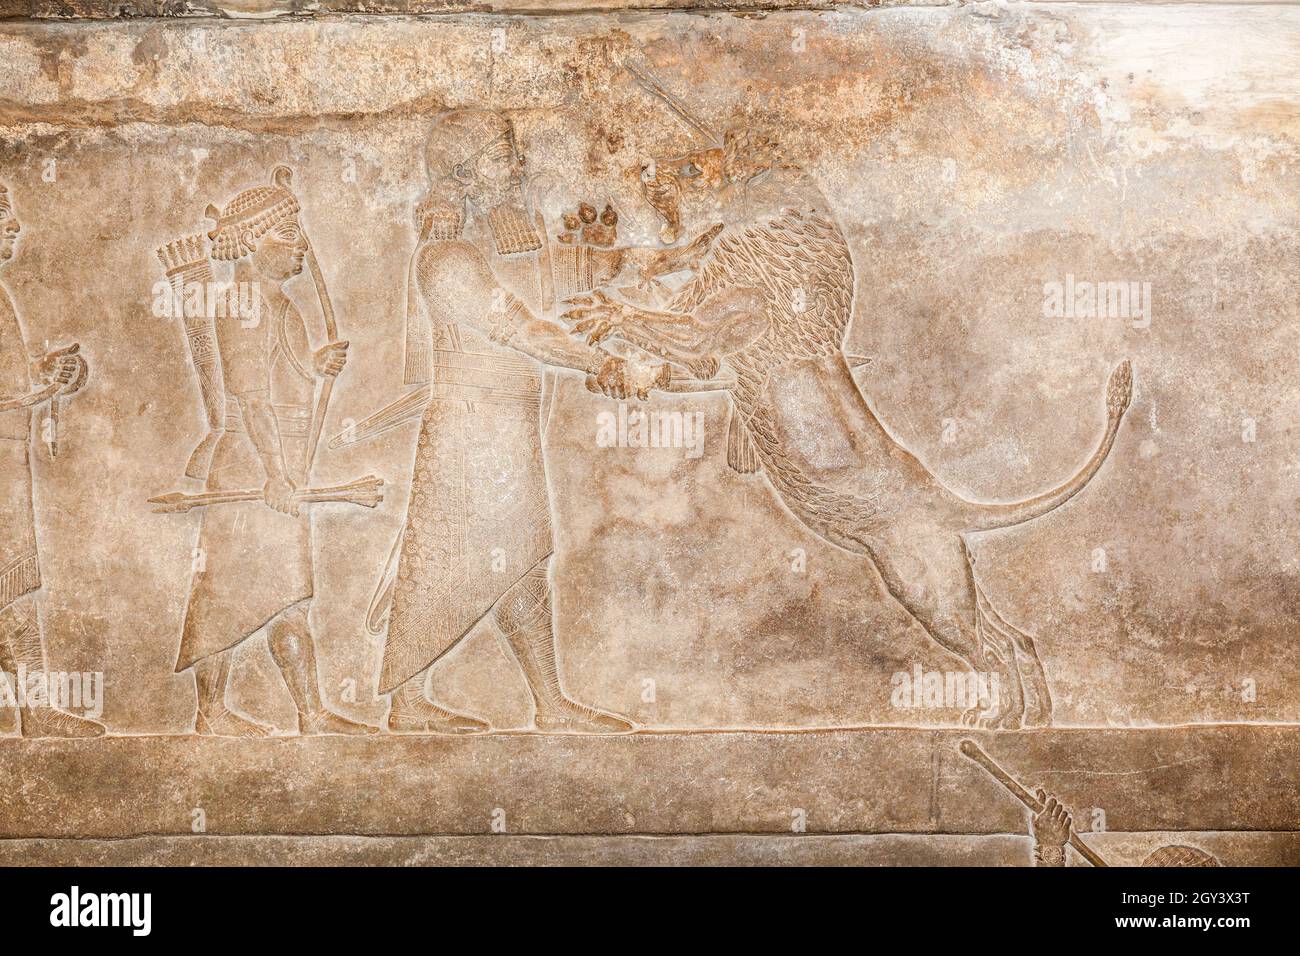 Assyrian carving about 645 bc from Nineveh . Of a lion hunt in the arena where lion is driven towards the king who kills them. Stock Photo